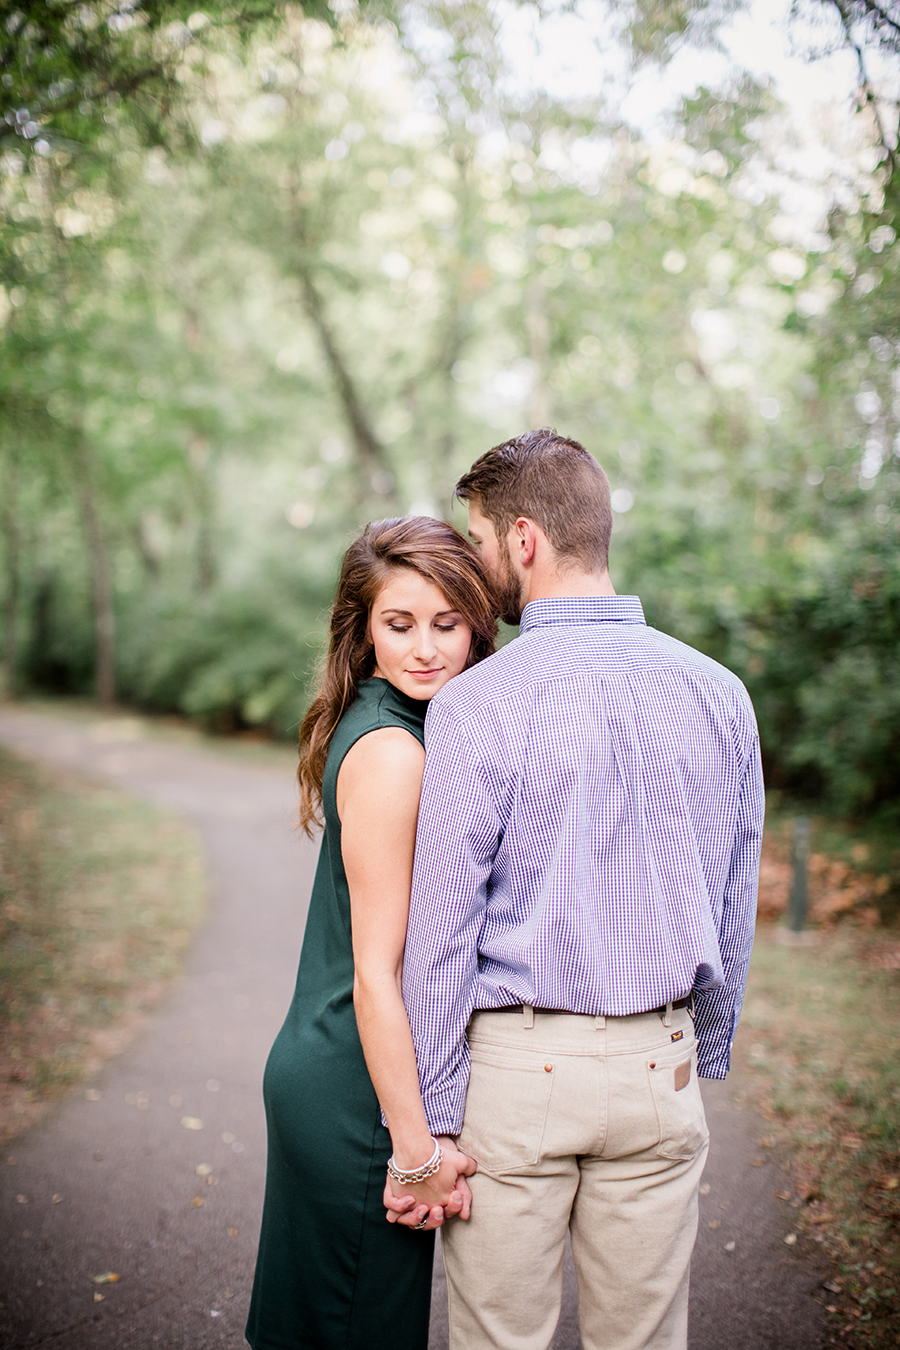 Her head on his shoulder by Knoxville Wedding Photographer, Amanda May Photos.